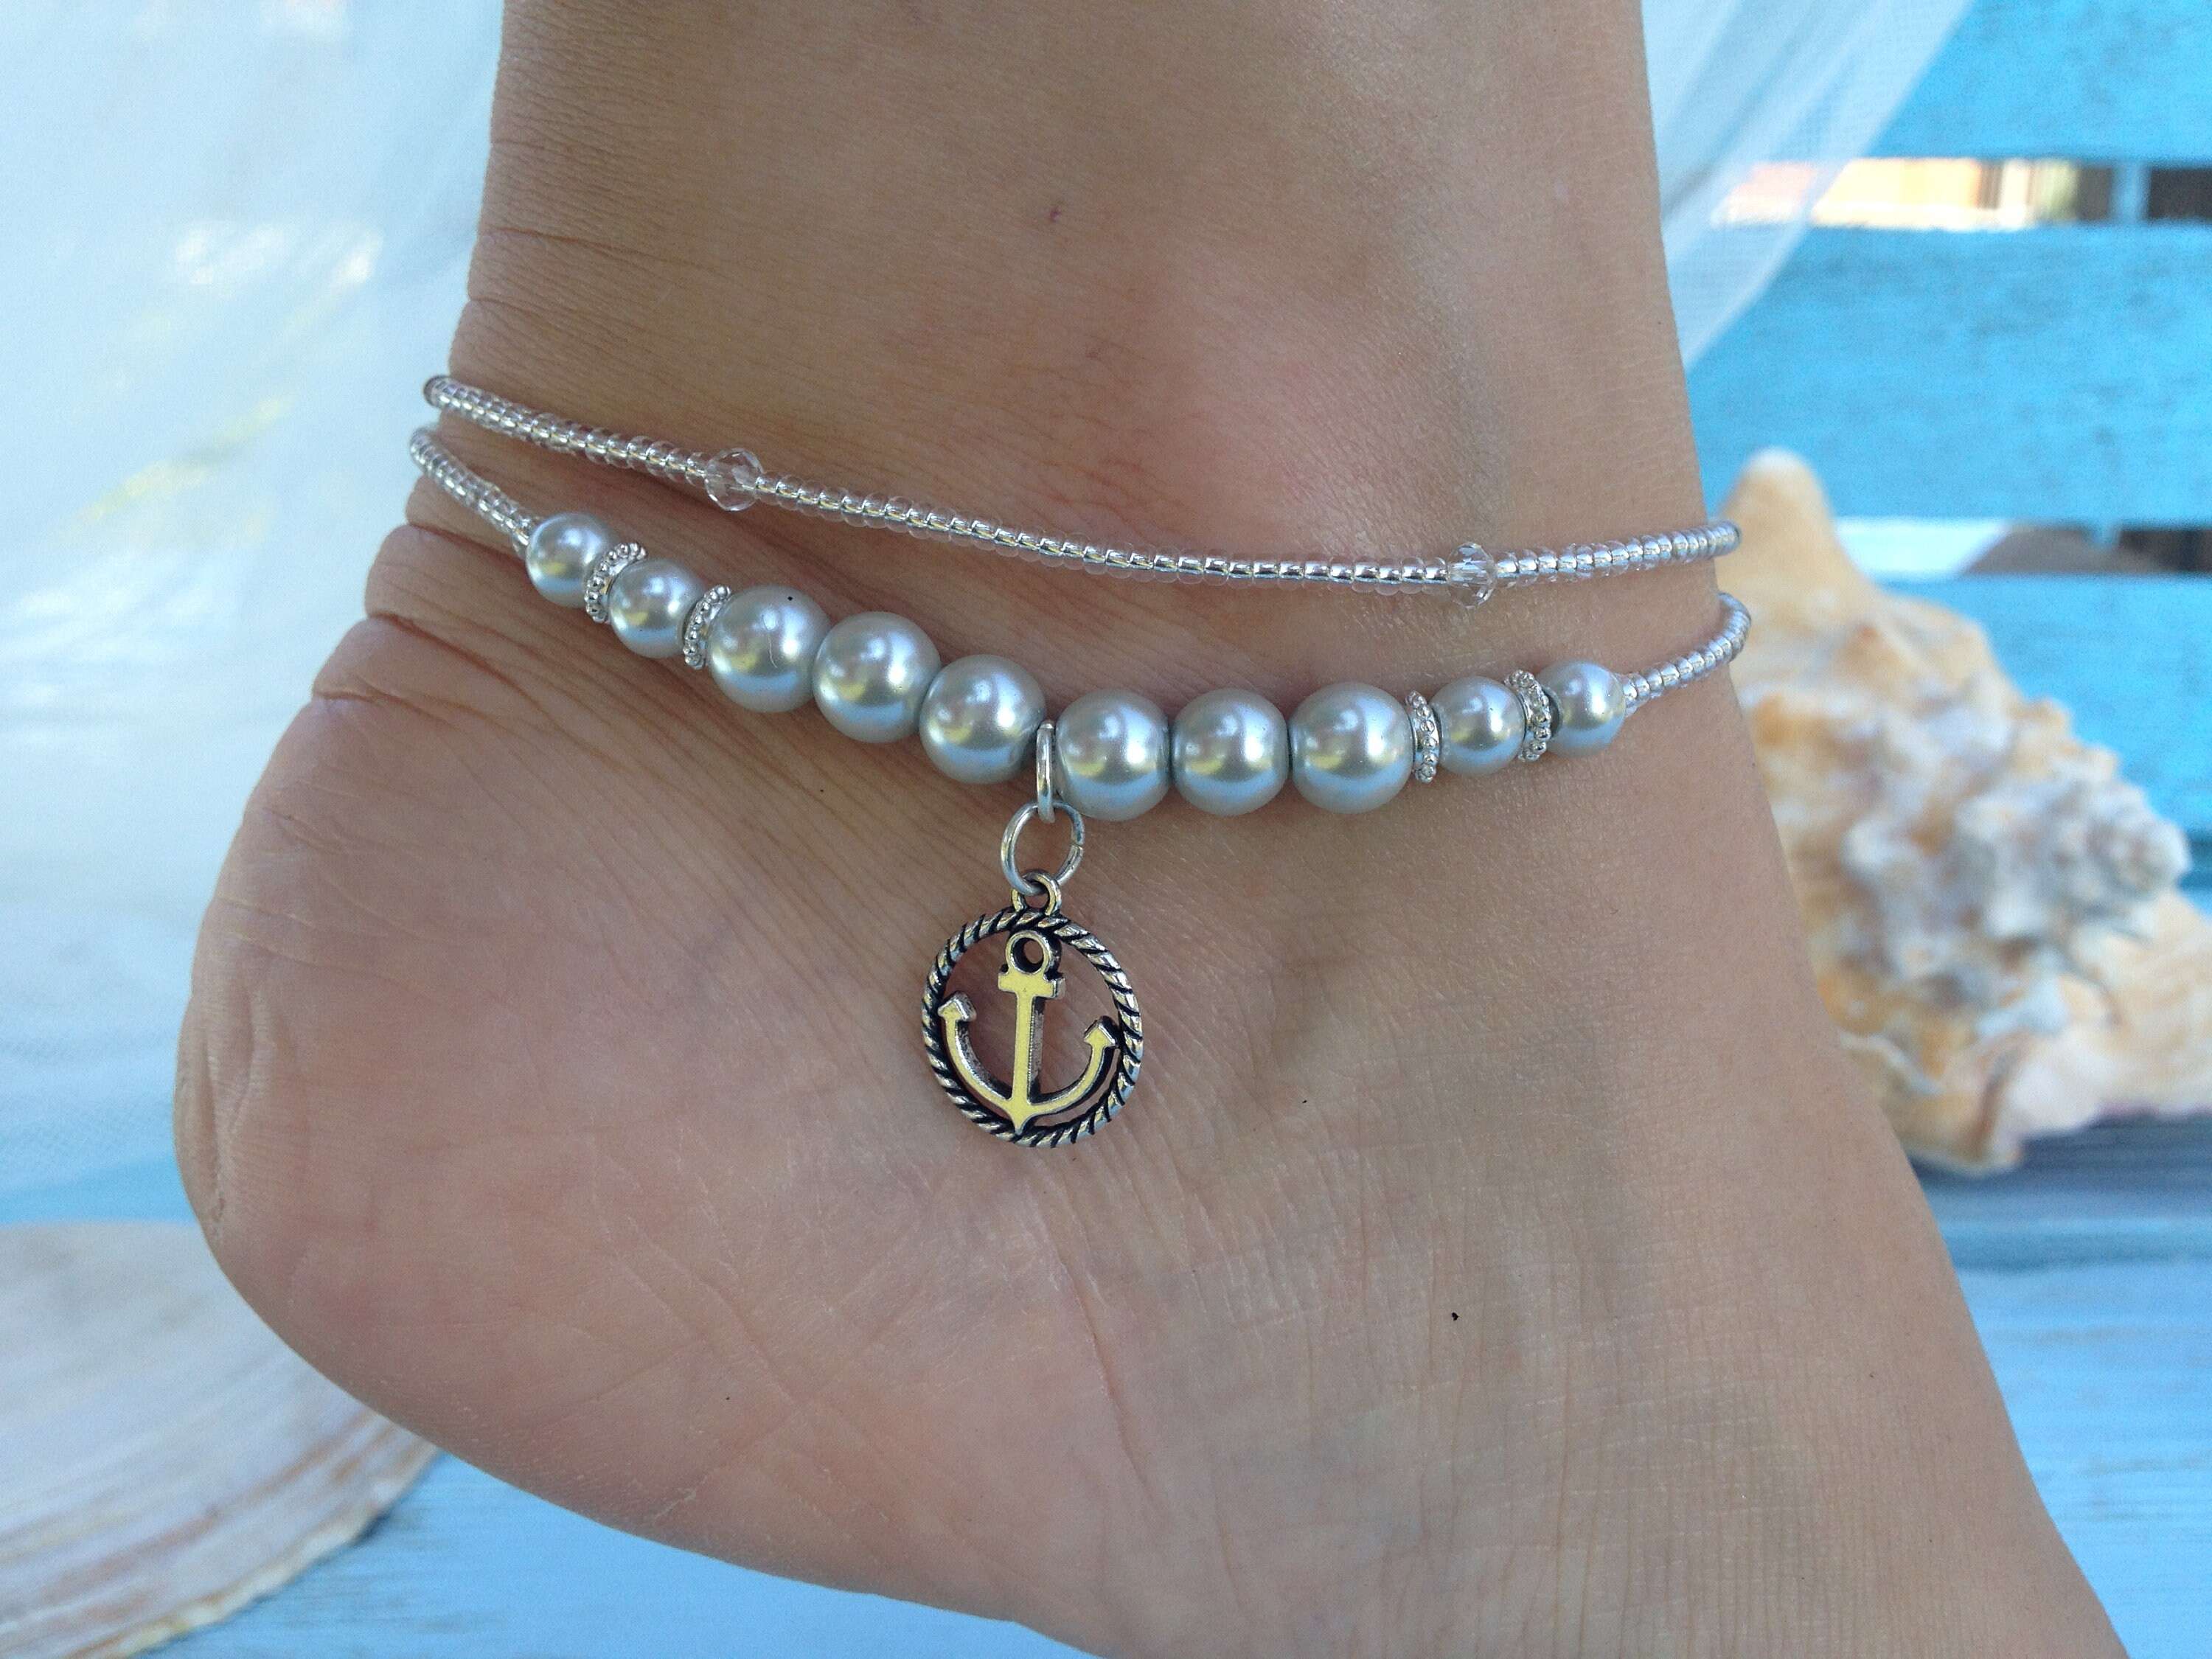 How To Make Anklets With Beads